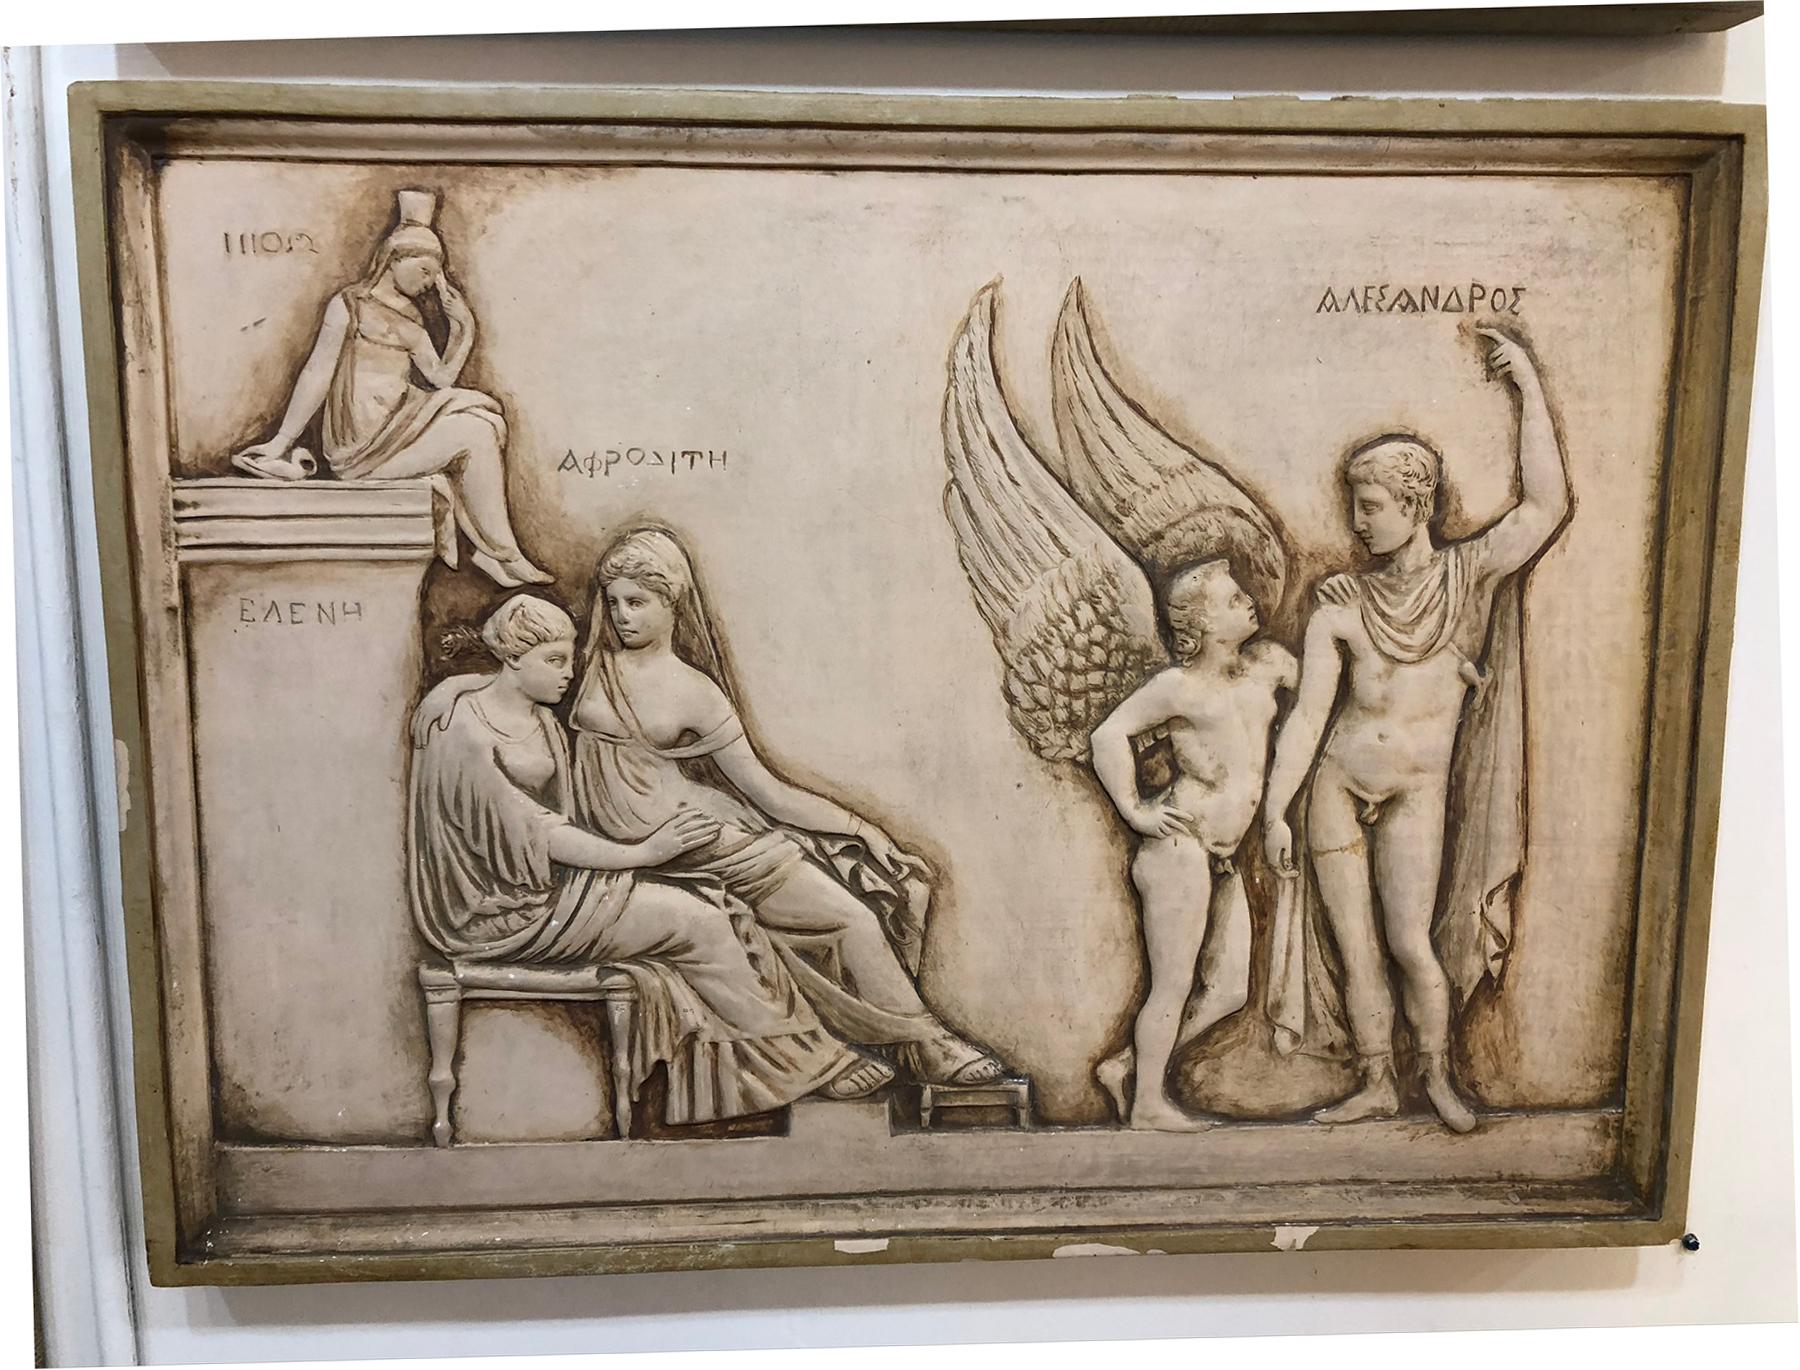 Italian sculptural base relief terracotta plaques. This neoclassical plaque which hung in the Otto Dommerich mansion in New York city. Italy circa 1930s. Marked Manifattura di Signa, Italy. Manifattura di Signa firm specialized in garden ornaments.